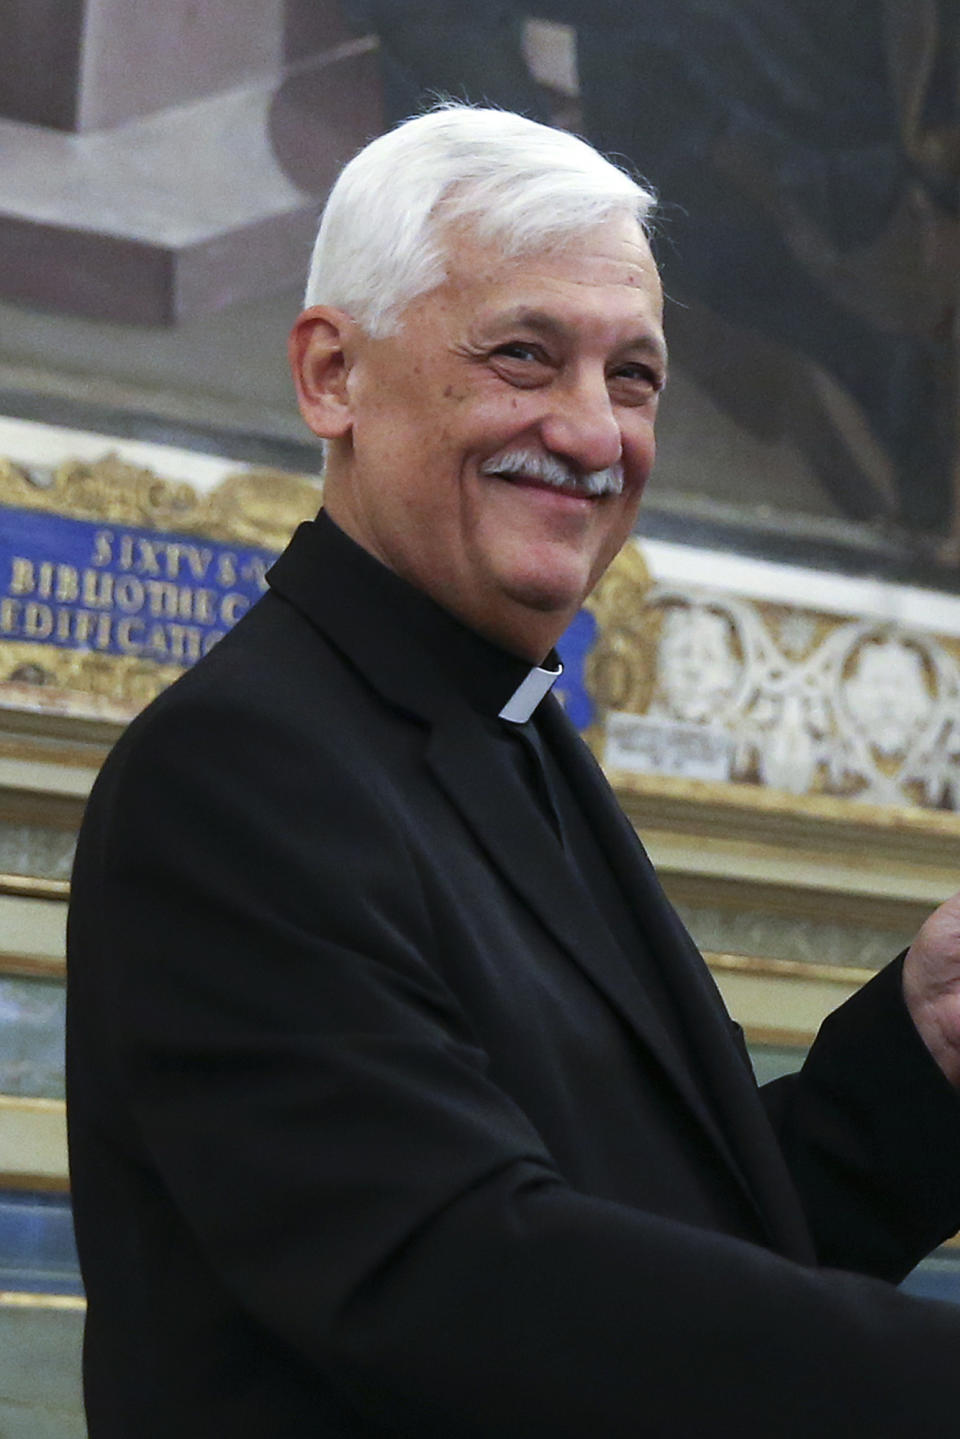 FILE - Father Arturo Sosa Abascal, the leader of the Roman Catholic religious order of the Jesuits, during a meeting at the Vatican, on June 22, 2017. The head of Pope Francis’ Jesuit religious order admitted Wednesday, Dec. 14, 2022, that a famous Jesuit priest had been convicted of one of the most serious crimes in the Catholic Church some two years before the Vatican decided to shelve another case against him for allegedly abusing other adult women under his spiritual care.The Rev. Arturo Sosa, the Jesuit superior general, made the admission during a briefing with journalists that was dominated by the scandal over the Rev. Marko Ivan Rubnik and the reluctance of both the Vatican and the Jesuits to tell the whole story behind the unusually lenient treatment he received.(Alessandro Bianchi/Pool Photo Via AP)